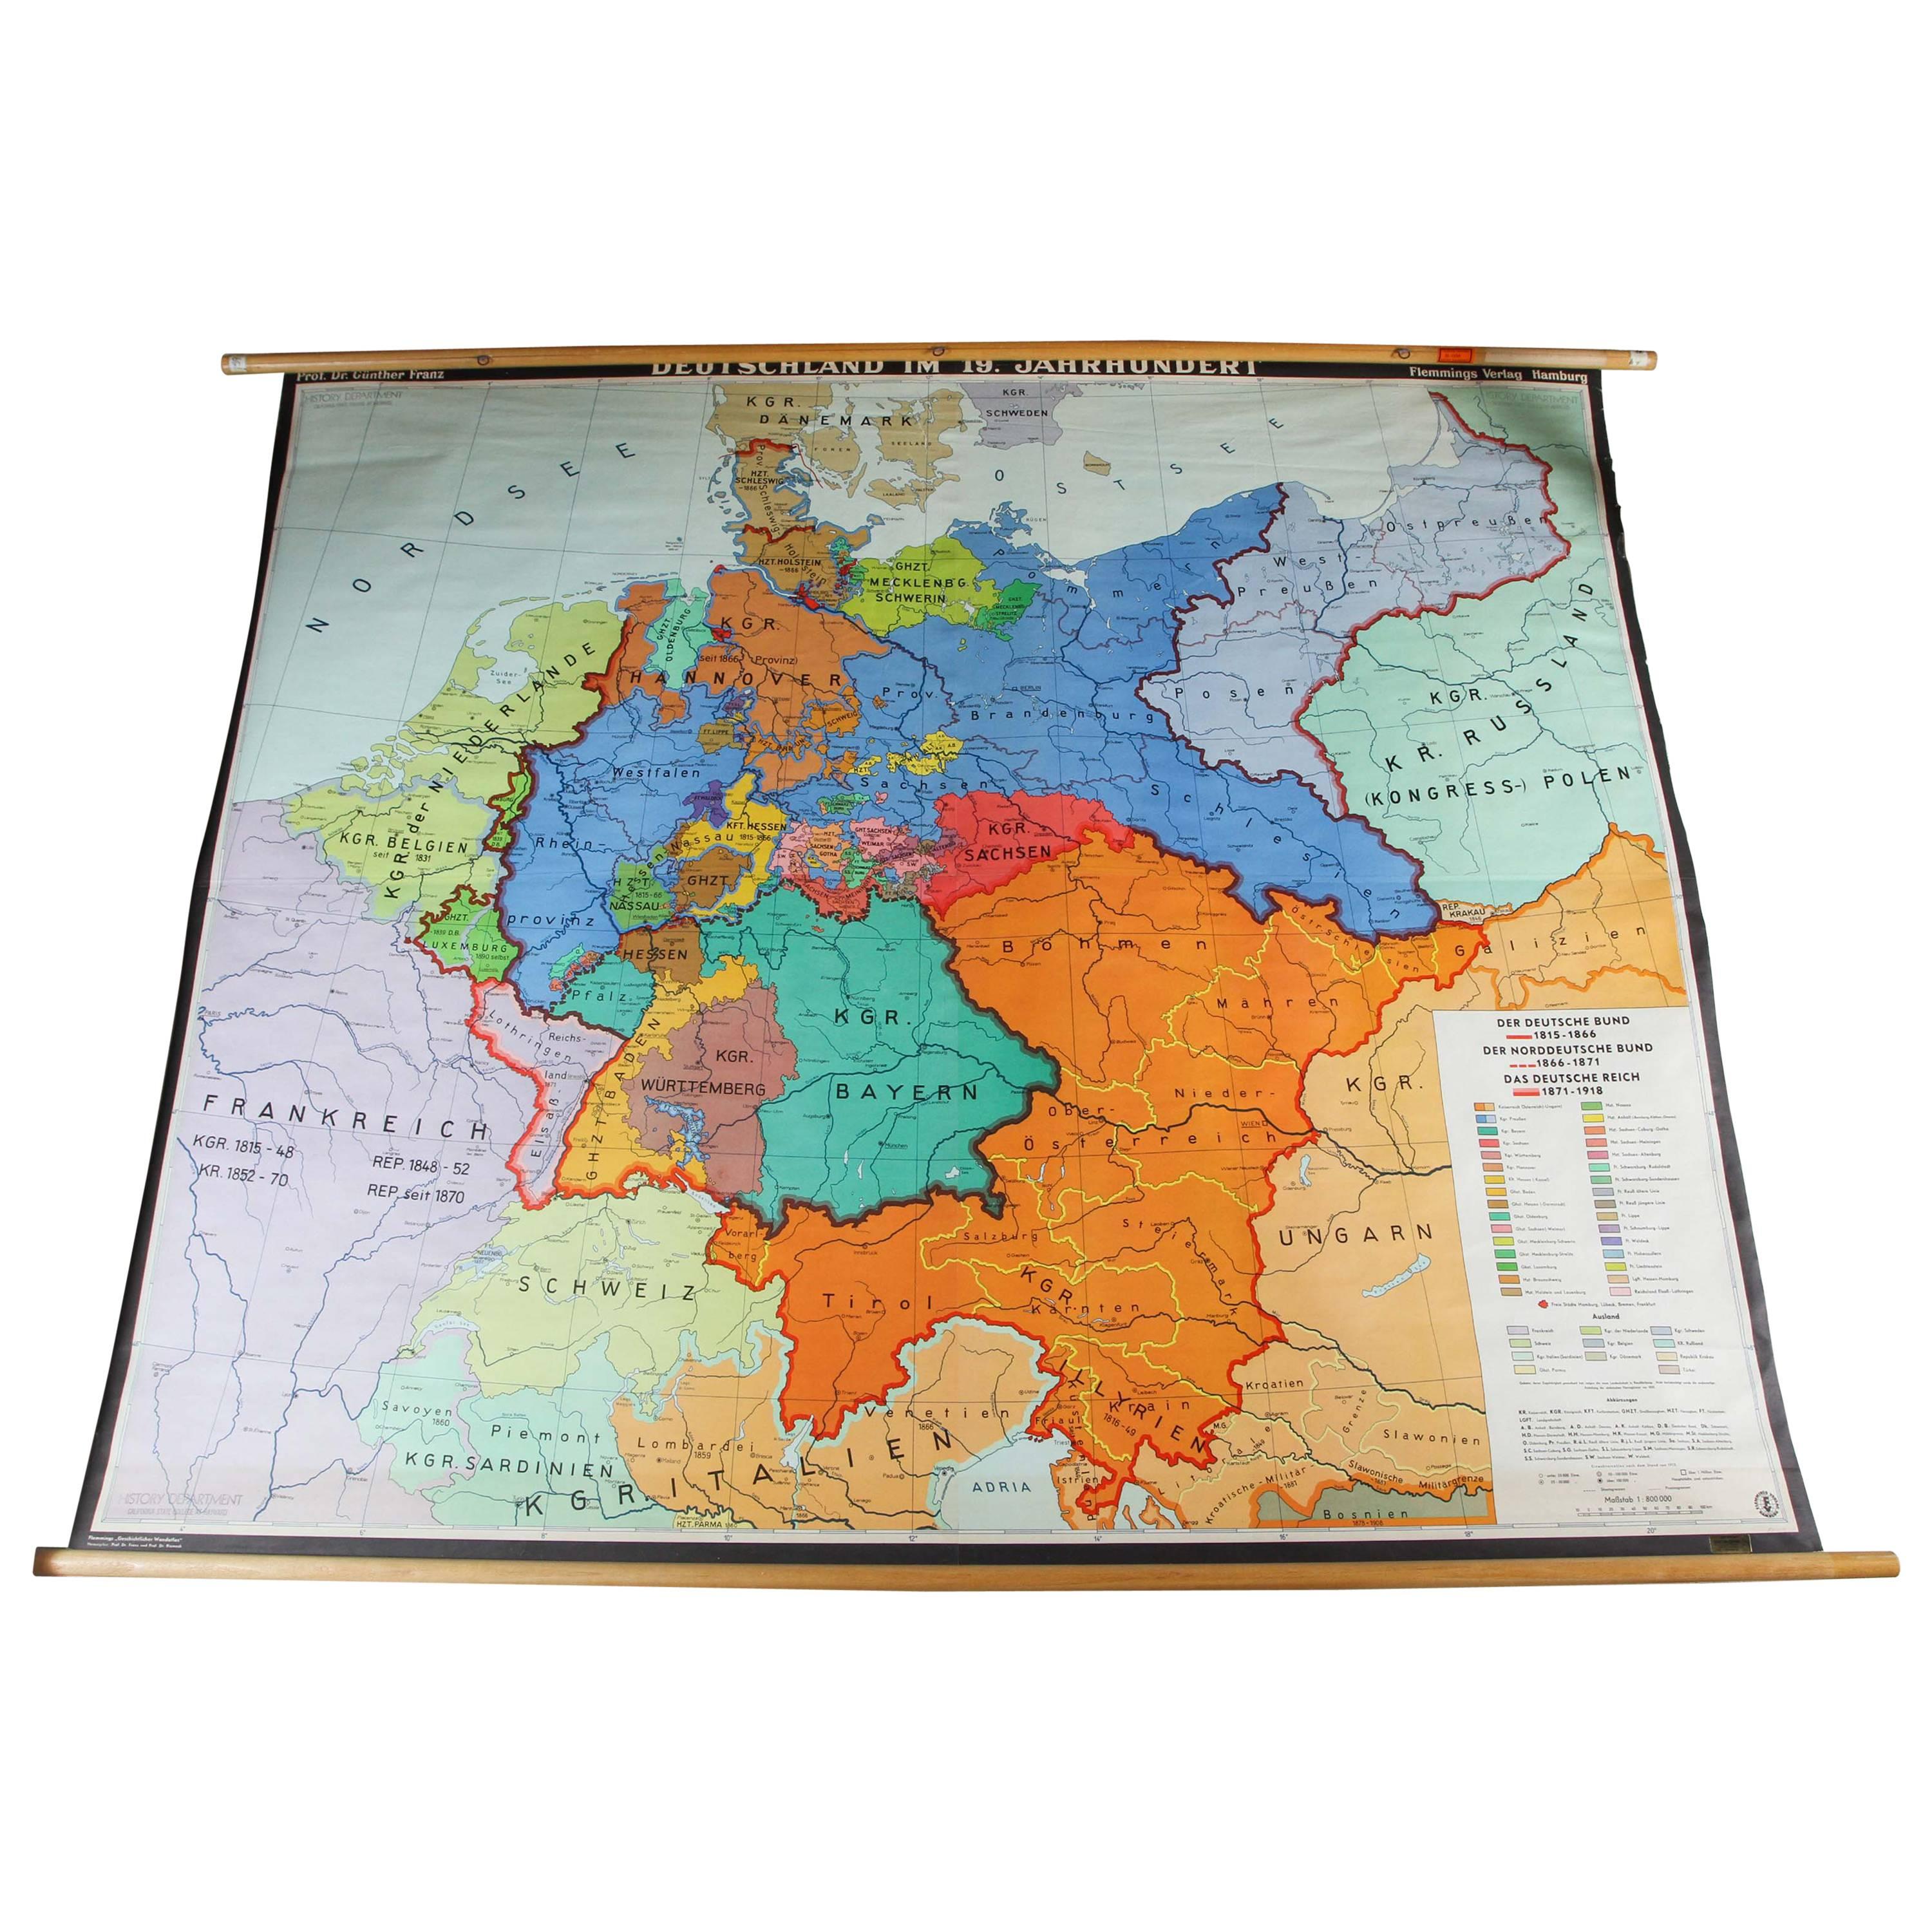 German Historical Map in Full Color Spanning, 1815-1918